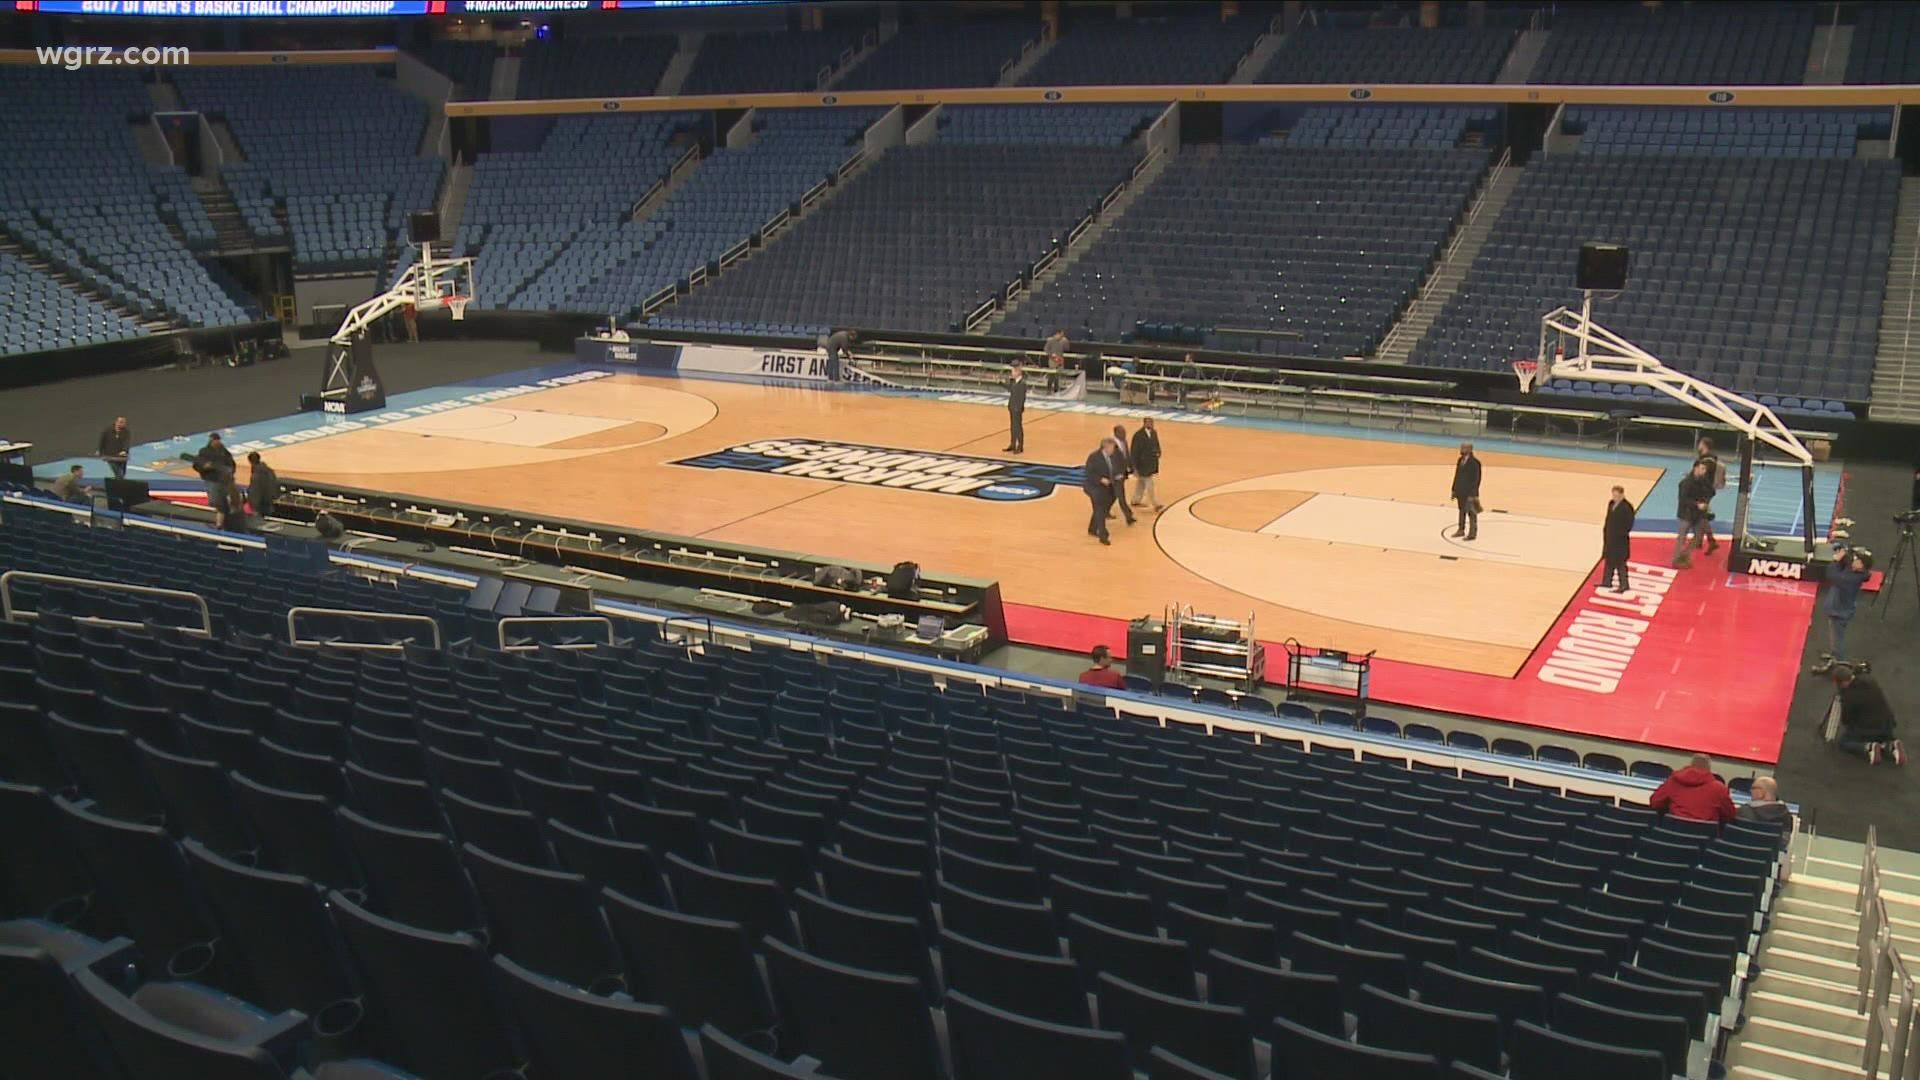 March madness will return to Buffalo with rounds one and two of the NCAA men's basketball tournament. Channel 2's Dave McKinley tells us what we can expect.